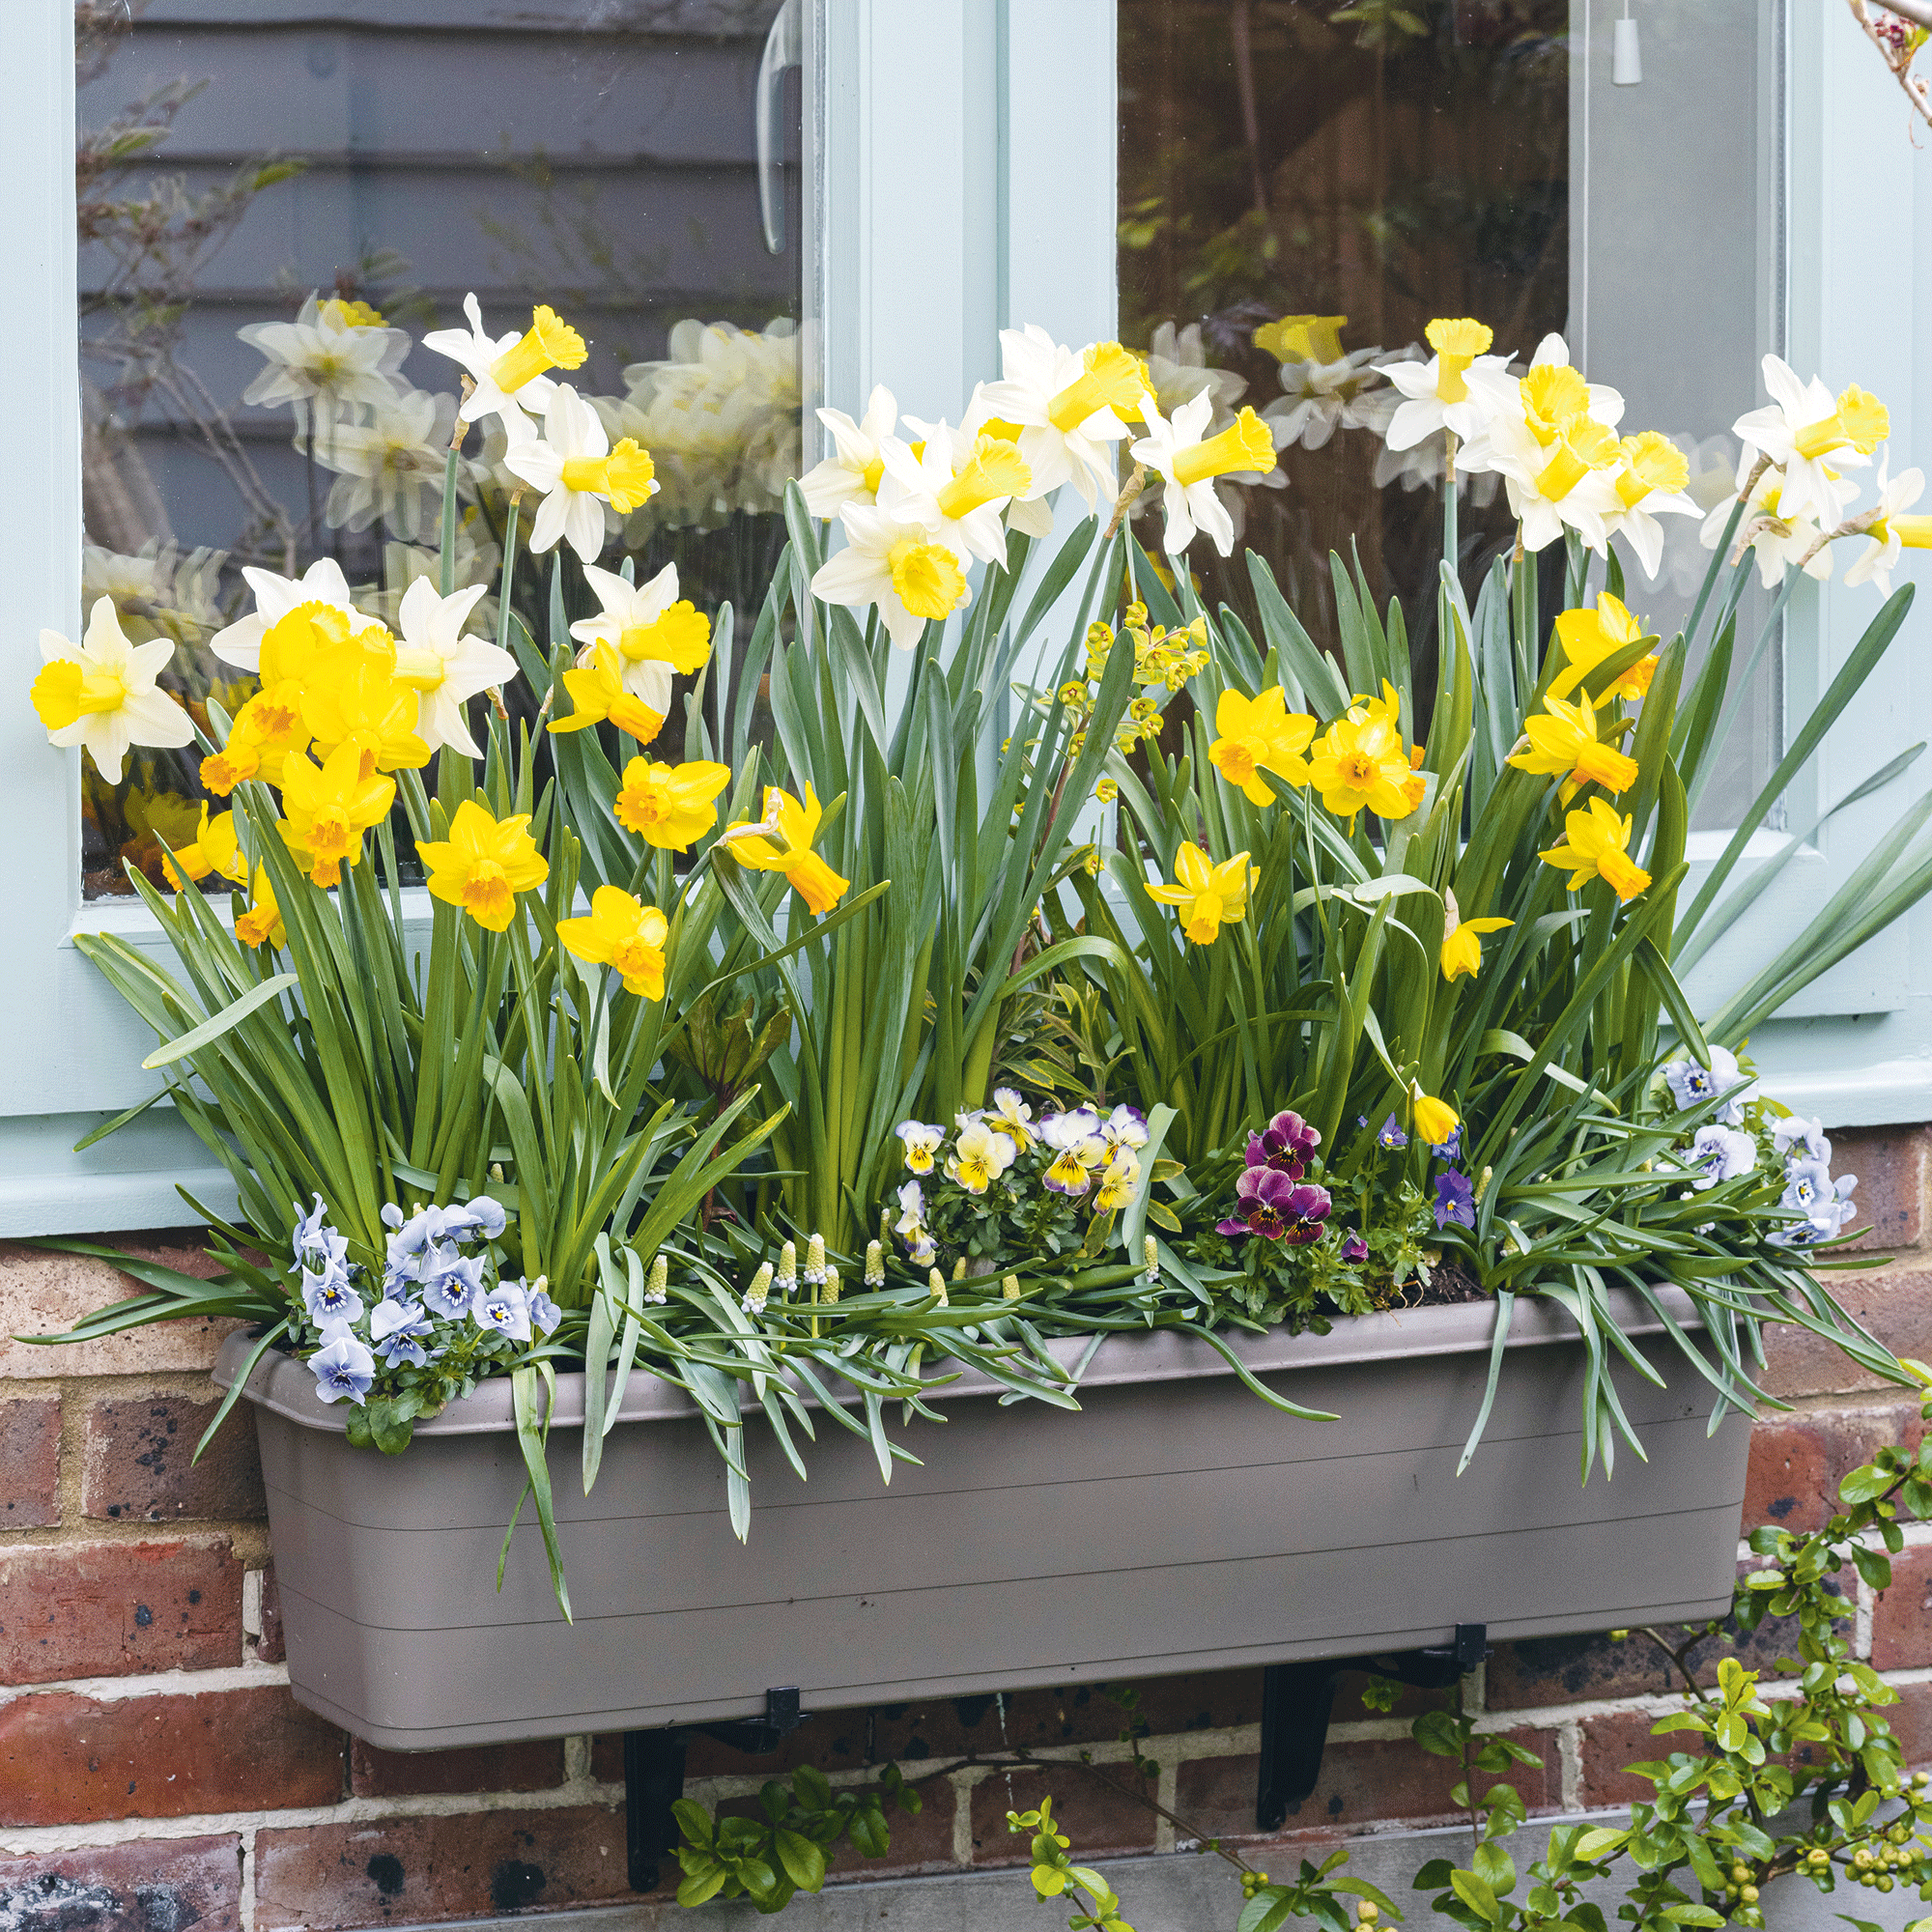 What to do with daffodils after flowering to ensure even bigger and brighter blooms next year